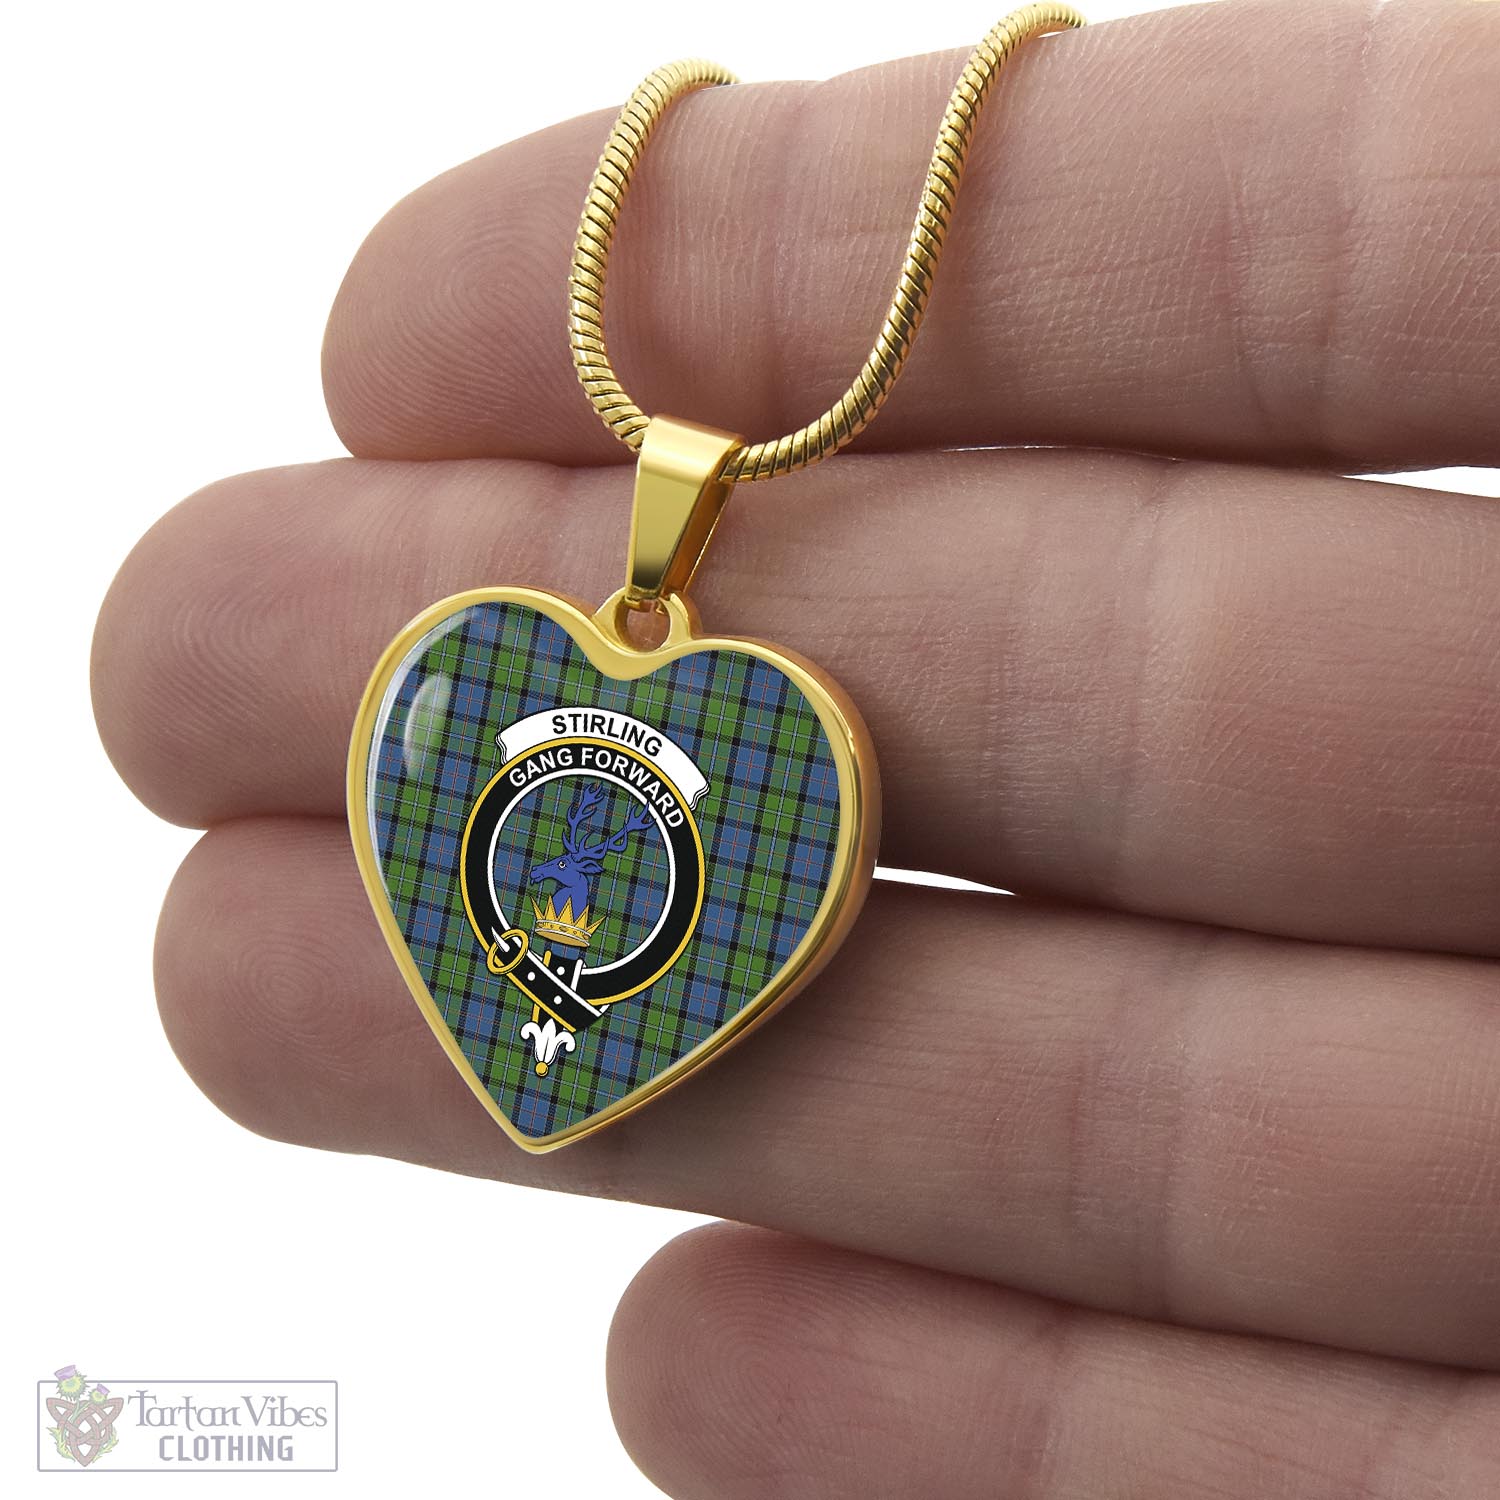 Tartan Vibes Clothing Stirling Tartan Heart Necklace with Family Crest